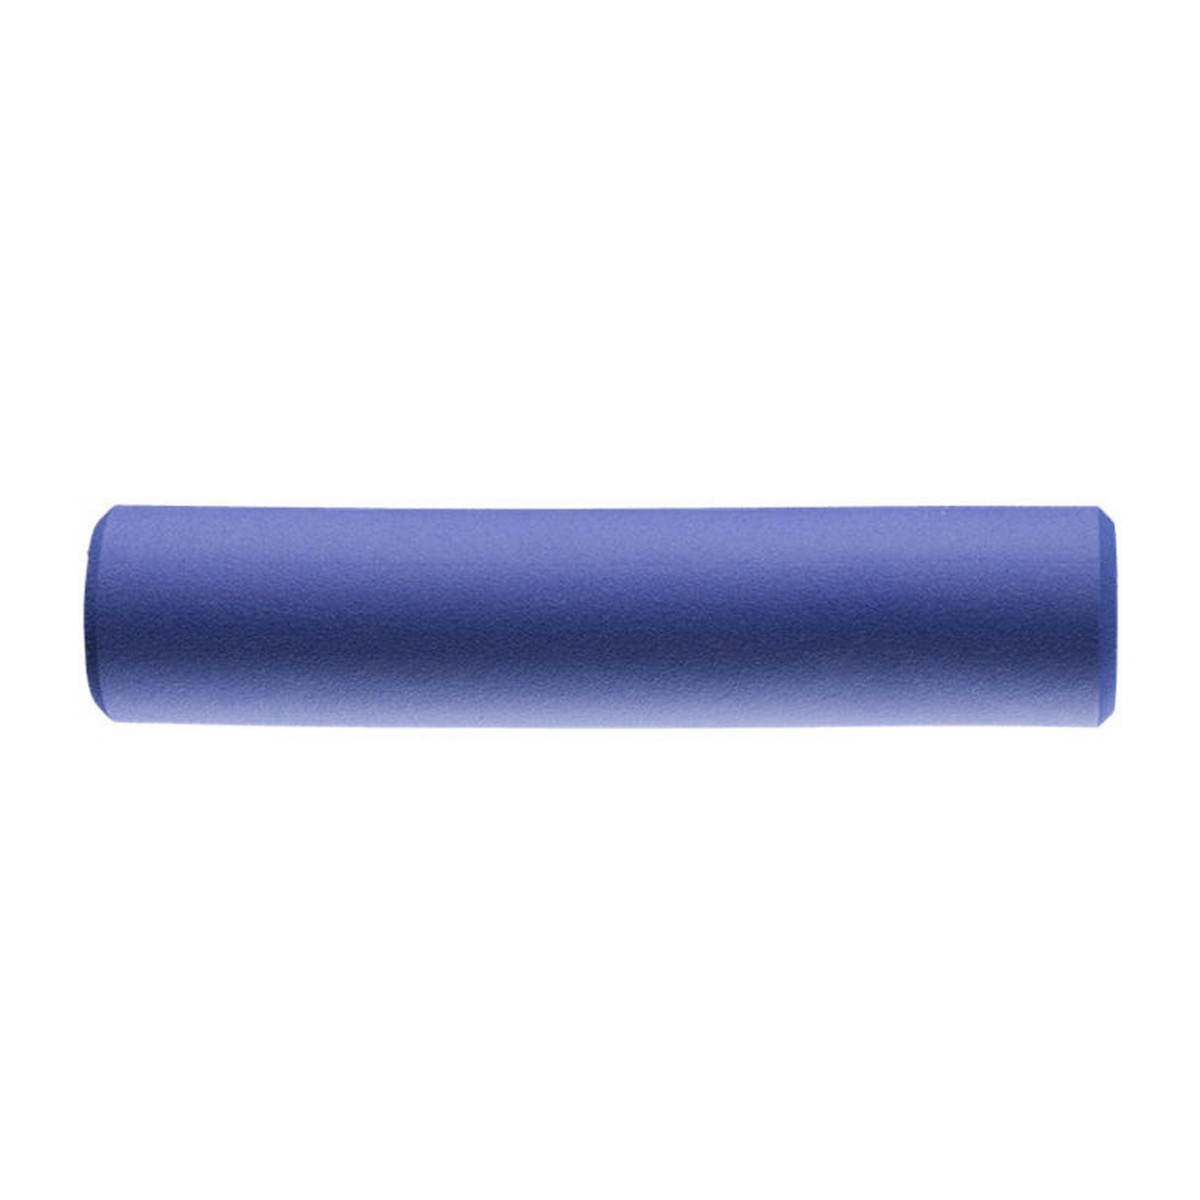 BONTRAGER XR SILICONE grips - blue